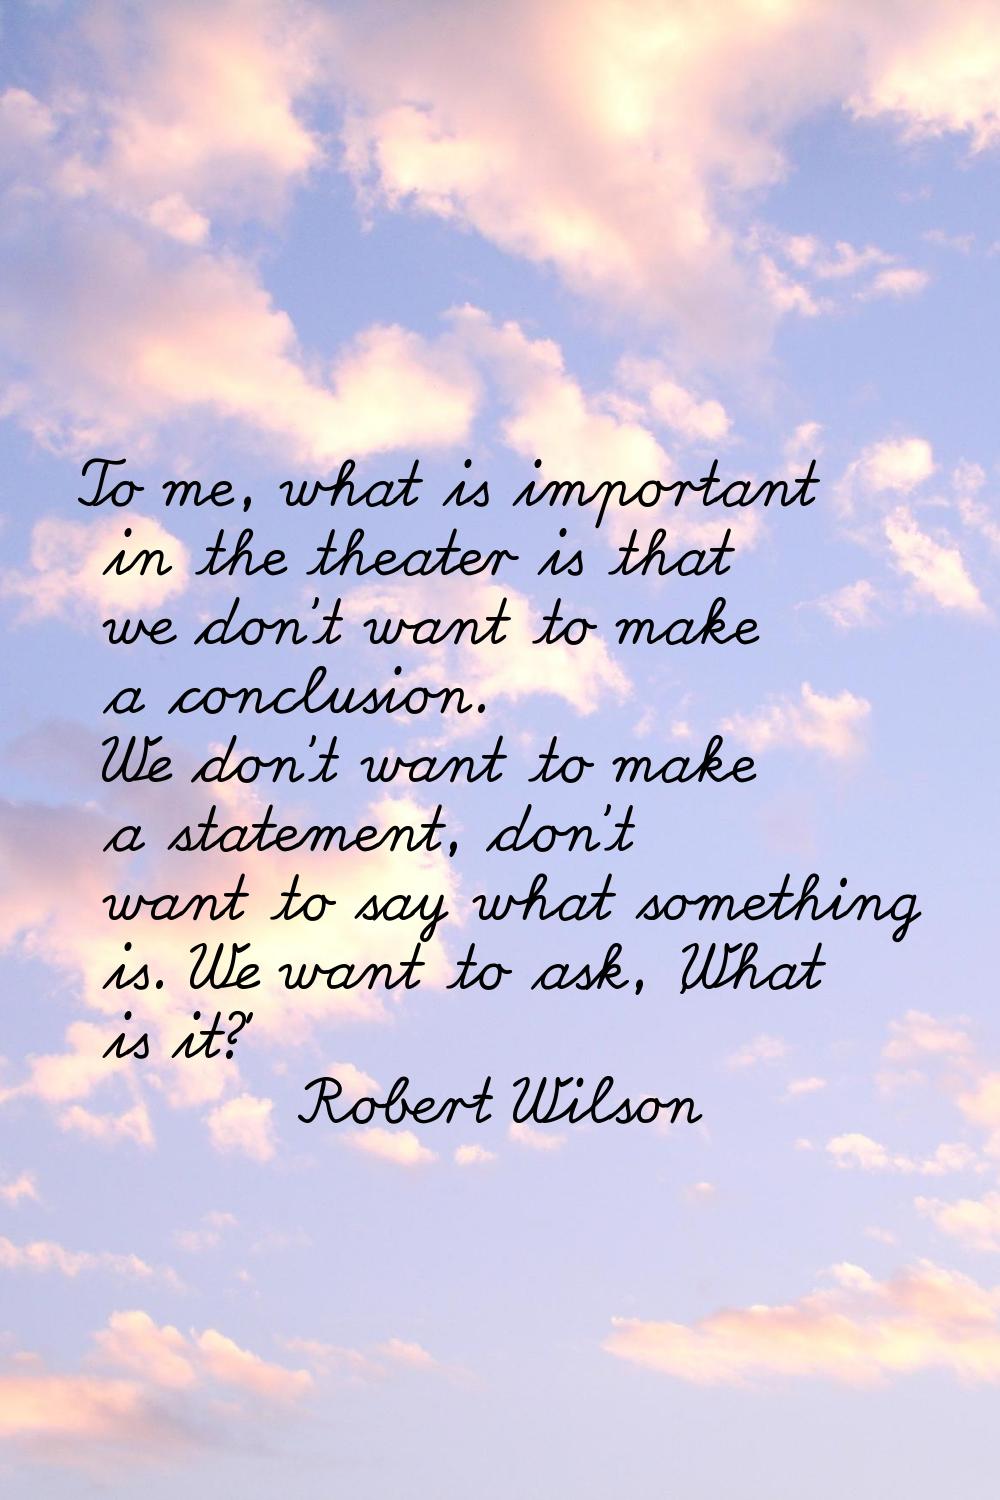 To me, what is important in the theater is that we don't want to make a conclusion. We don't want t